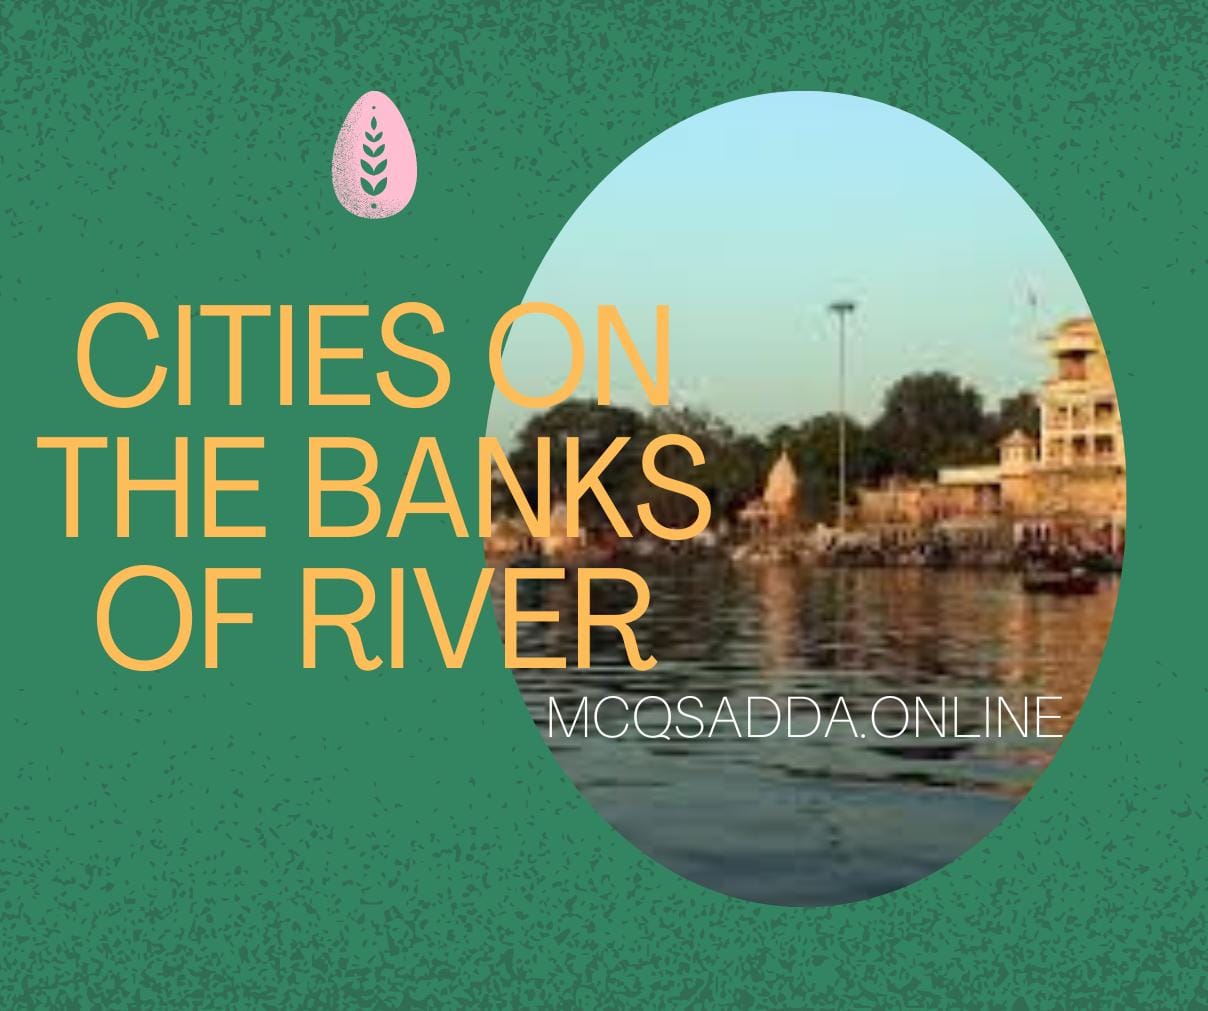 Mcqs on cities on the banks of rivers